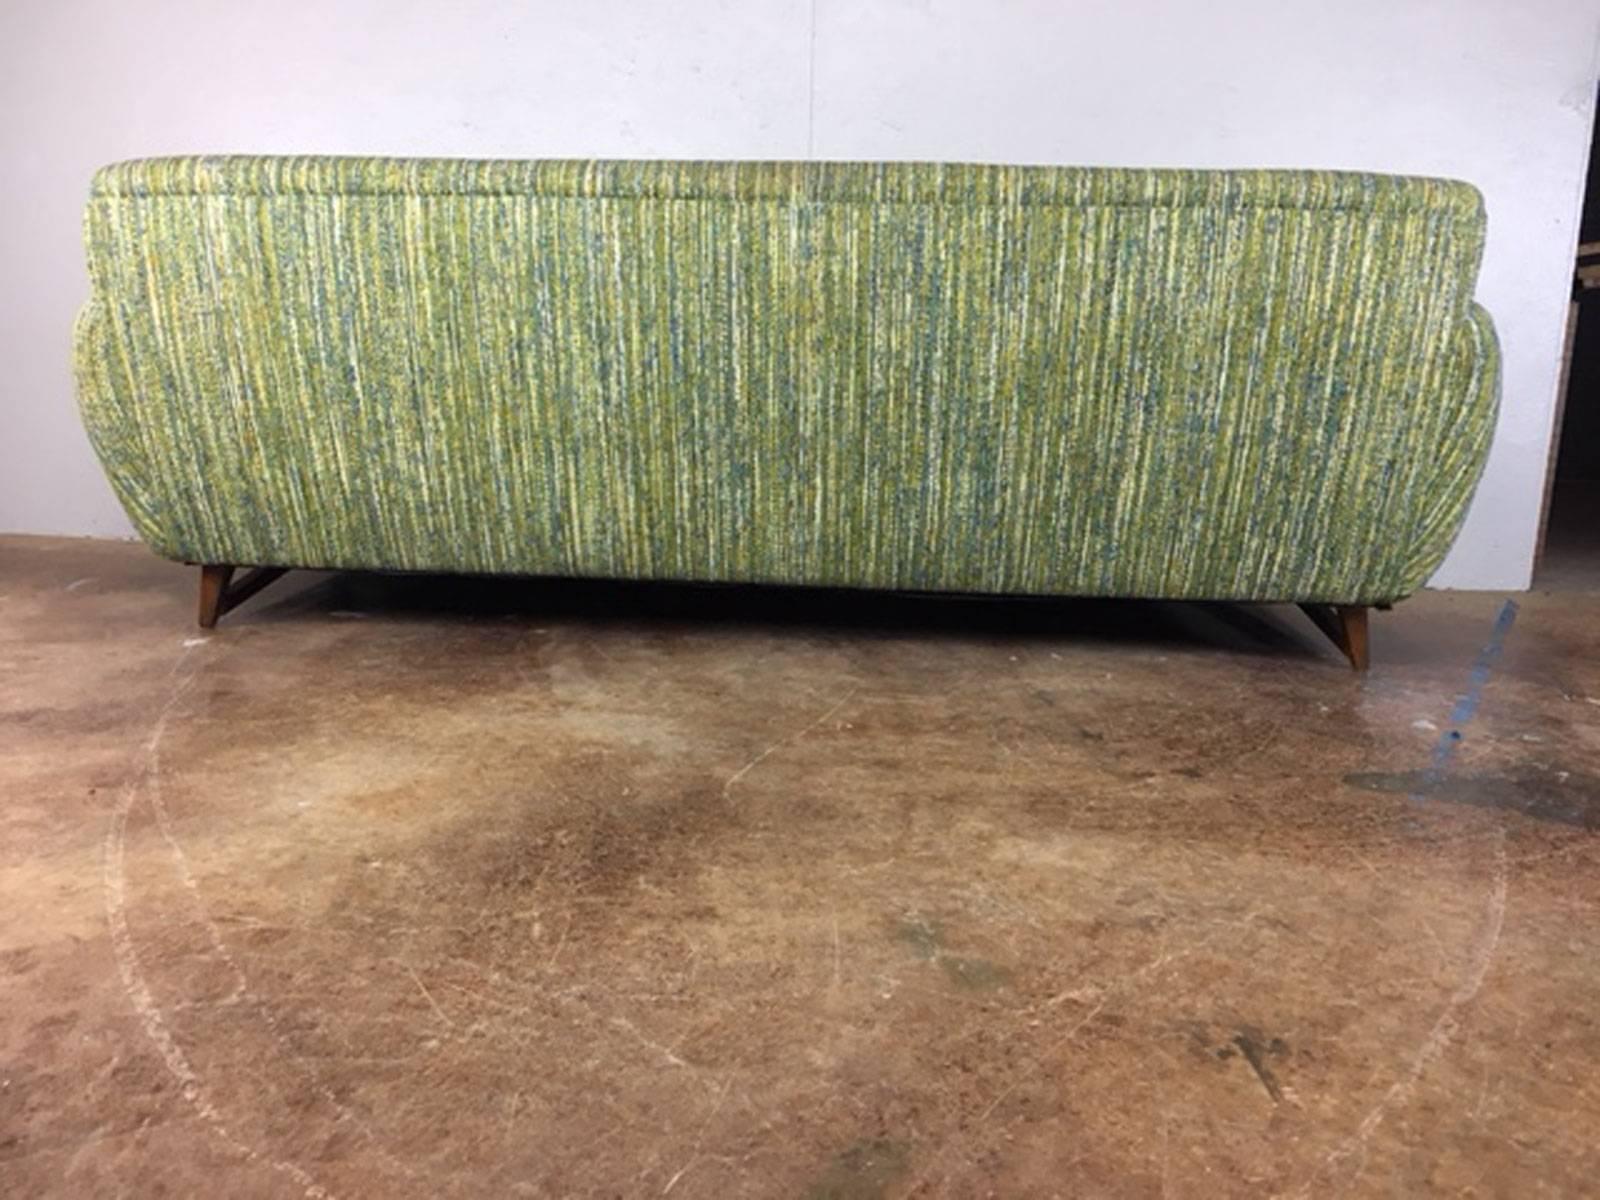 Superb Adrian Pearsall style Mid-Century Modern sofa with walnut side structure and legs and slant side armrests. Original fabric. No holes, tears, or unusual wear.